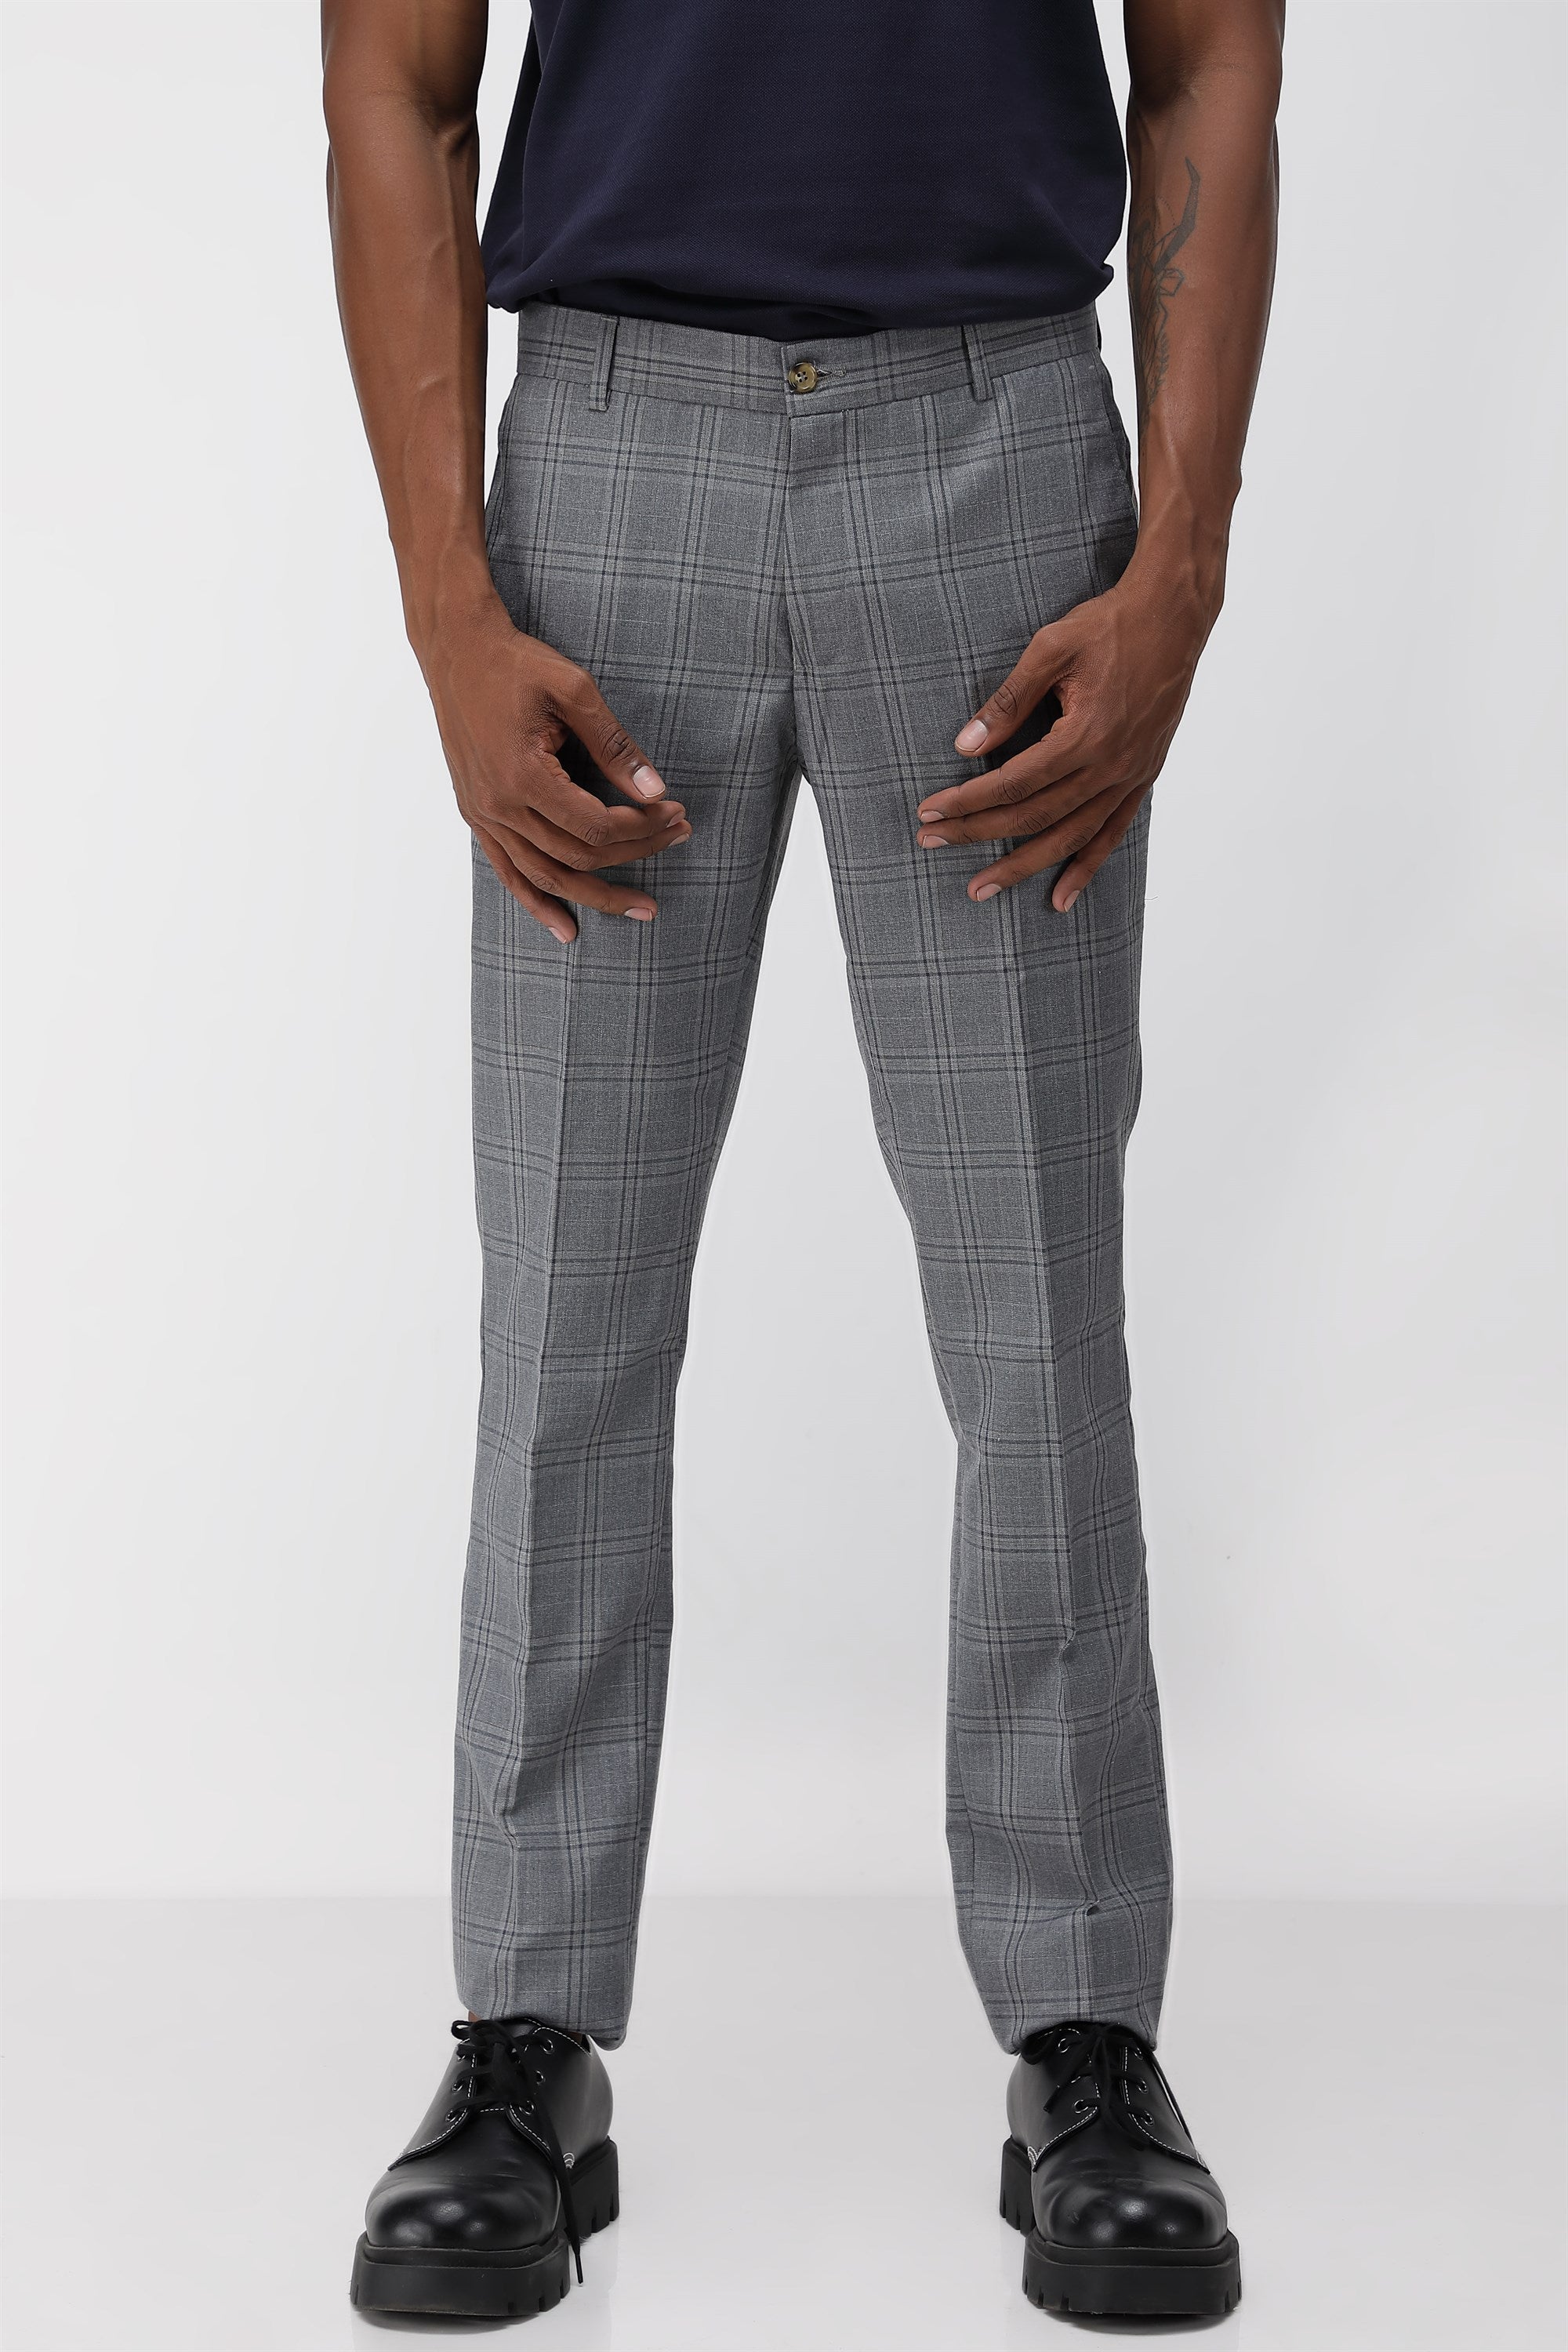 Plaid Pant Slim Fit Skinny Trousers Casuals Business Formal Check Trouser  Men's | eBay